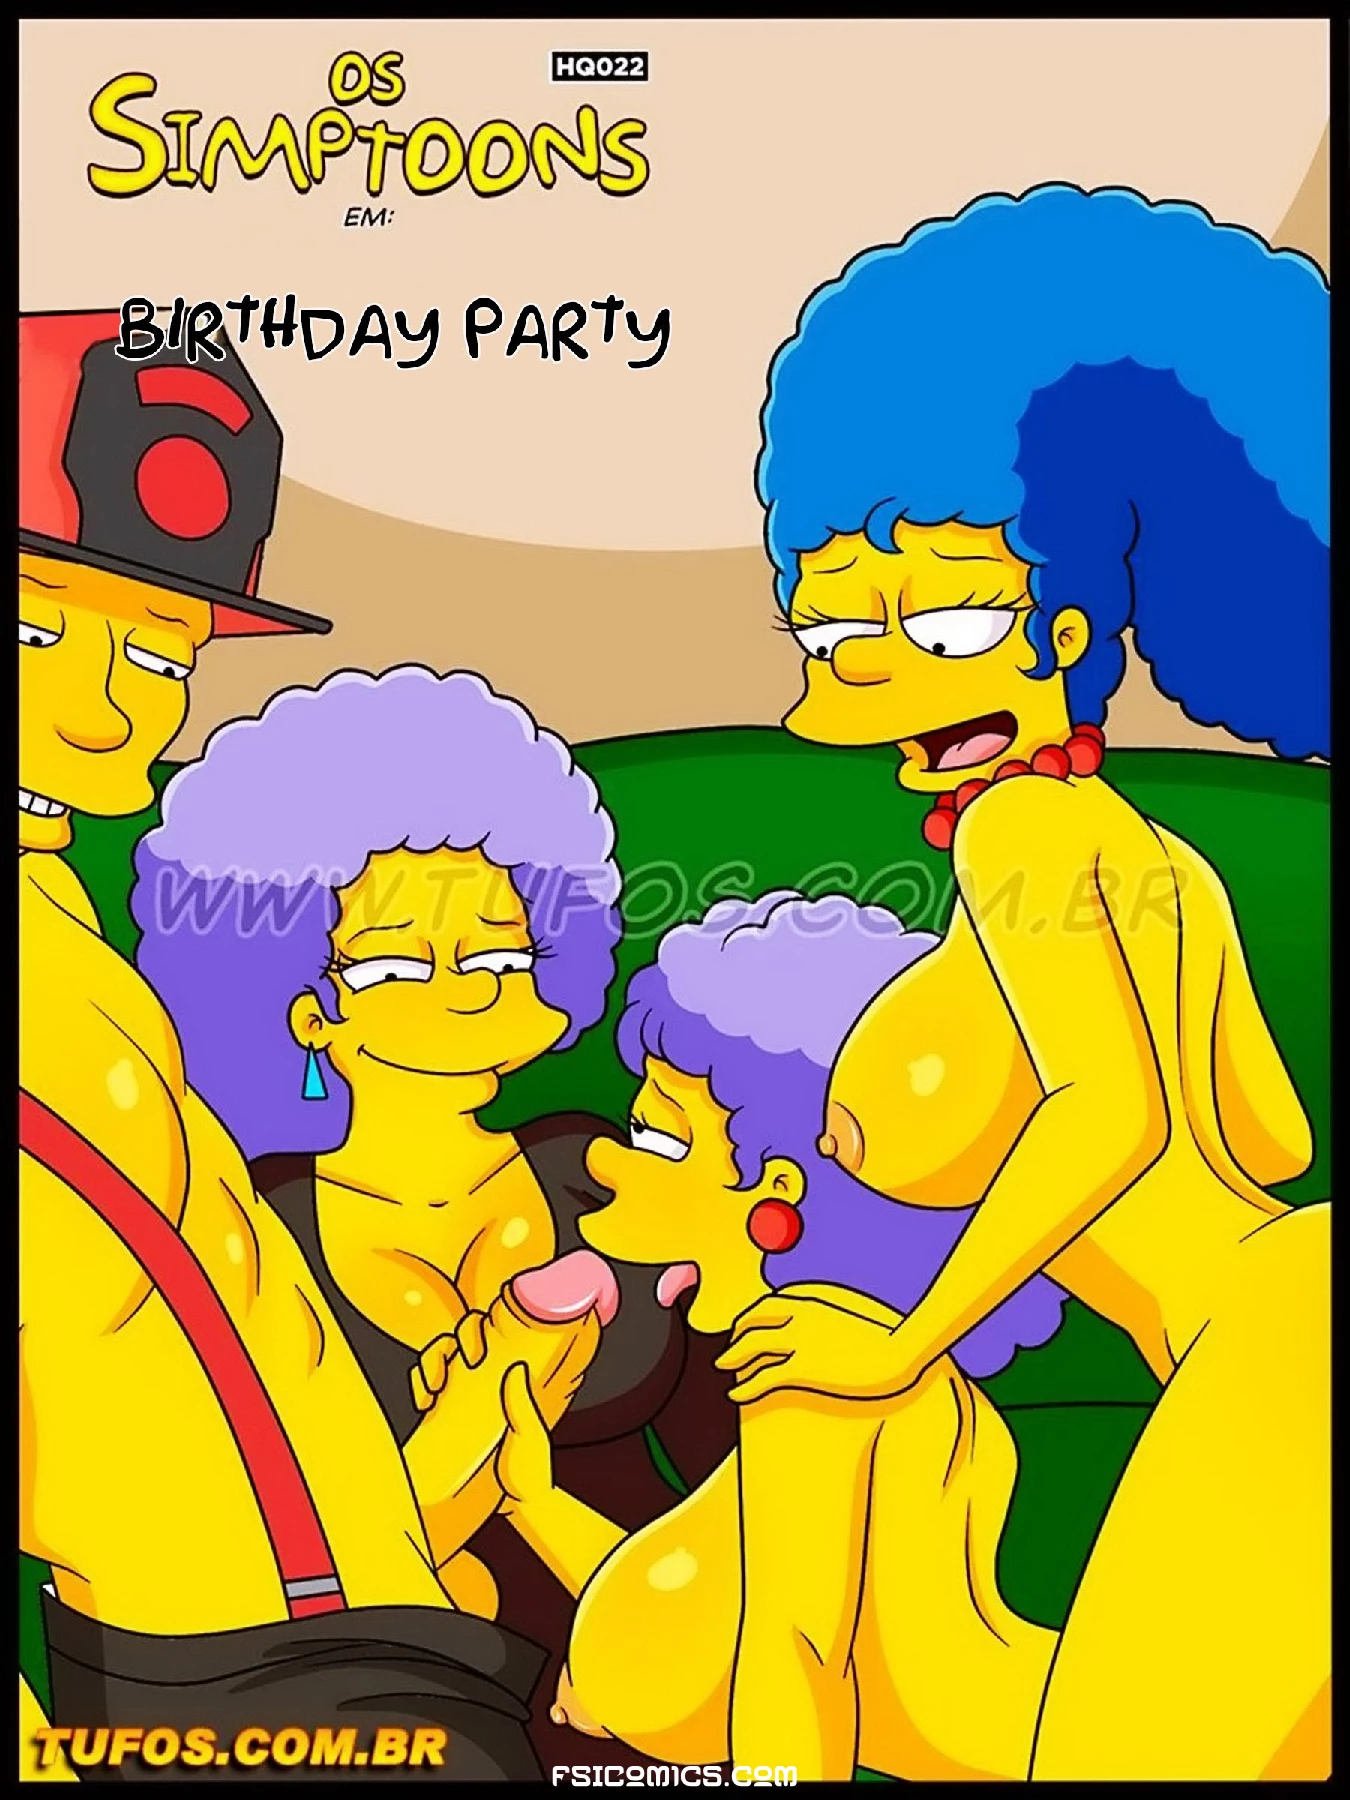 The Simpsons Chapter 22 – Birthday Party – WC TF - 39 - FSIComics